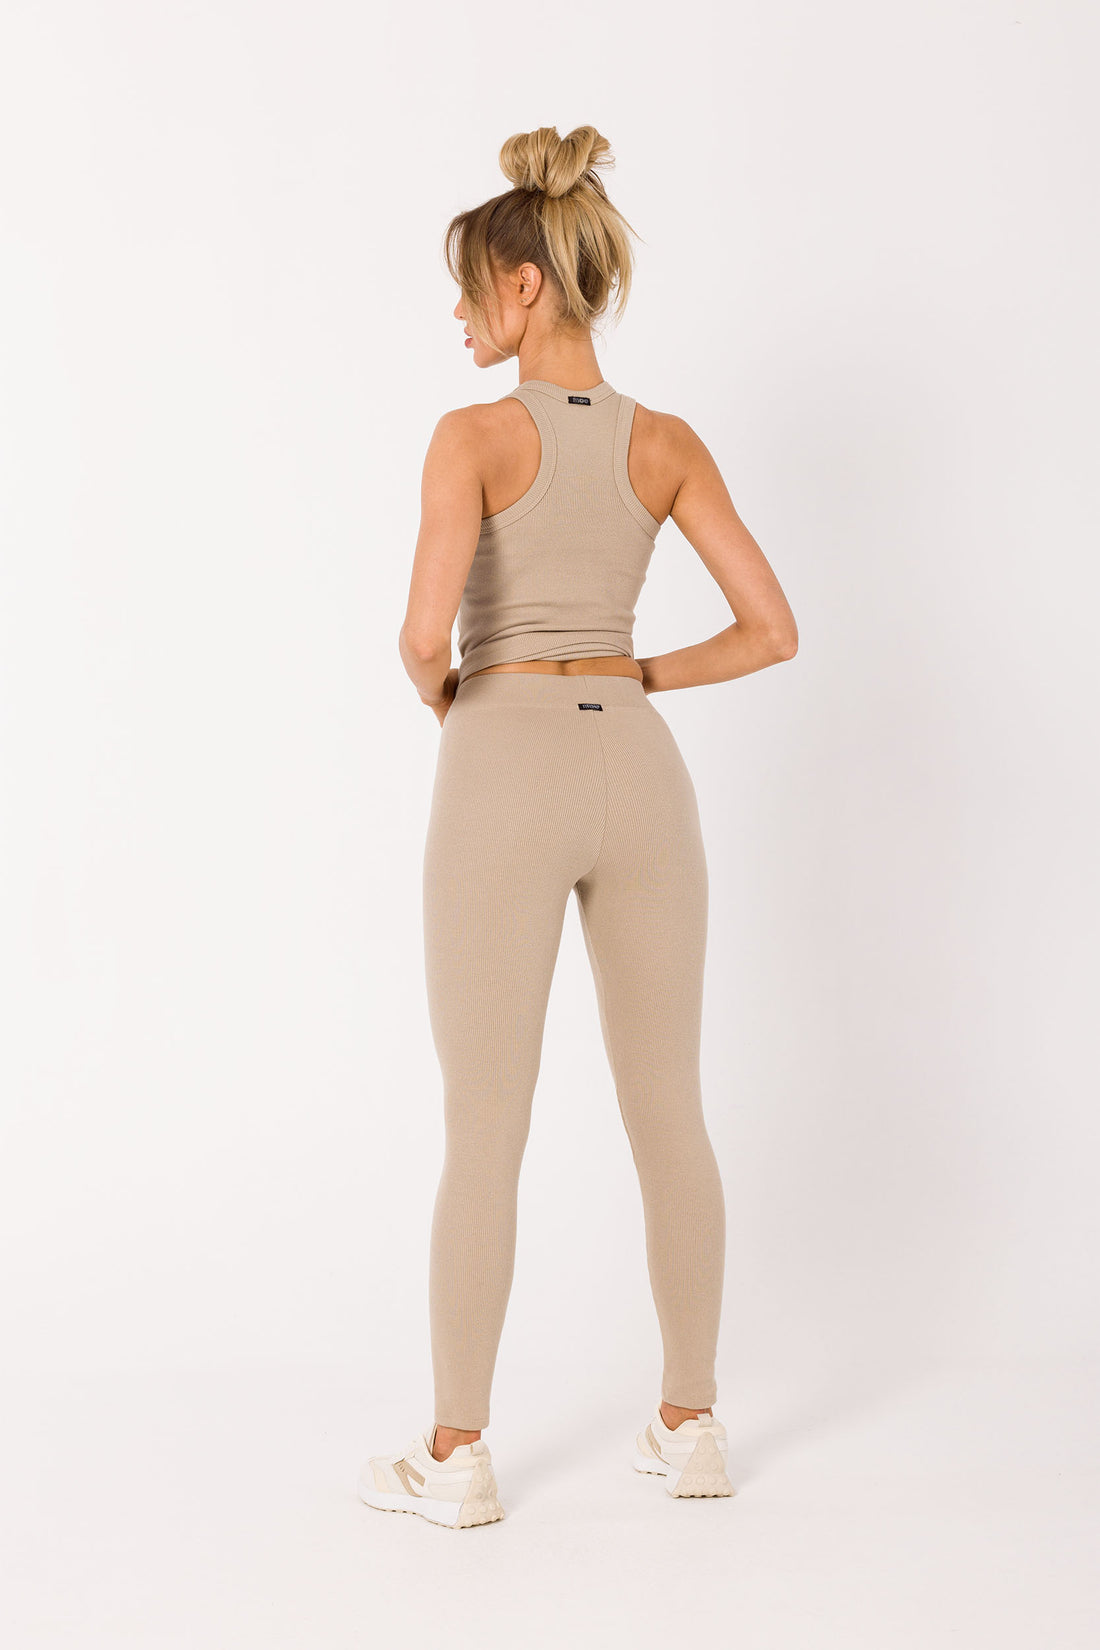 Upgrade your wardrobe with our Beige Ribbed Knit Leggings. Crafted from high-quality ribbed knit fabric, these leggings can be worn as a set with our matching tank top or mixed and matched for various chic outfits. Their neutral beige hue makes them perfect for loungewear, working from home, sports, and running errands. Experience the comfort and style of this essential piece that adapts to your everyday fashion needs.